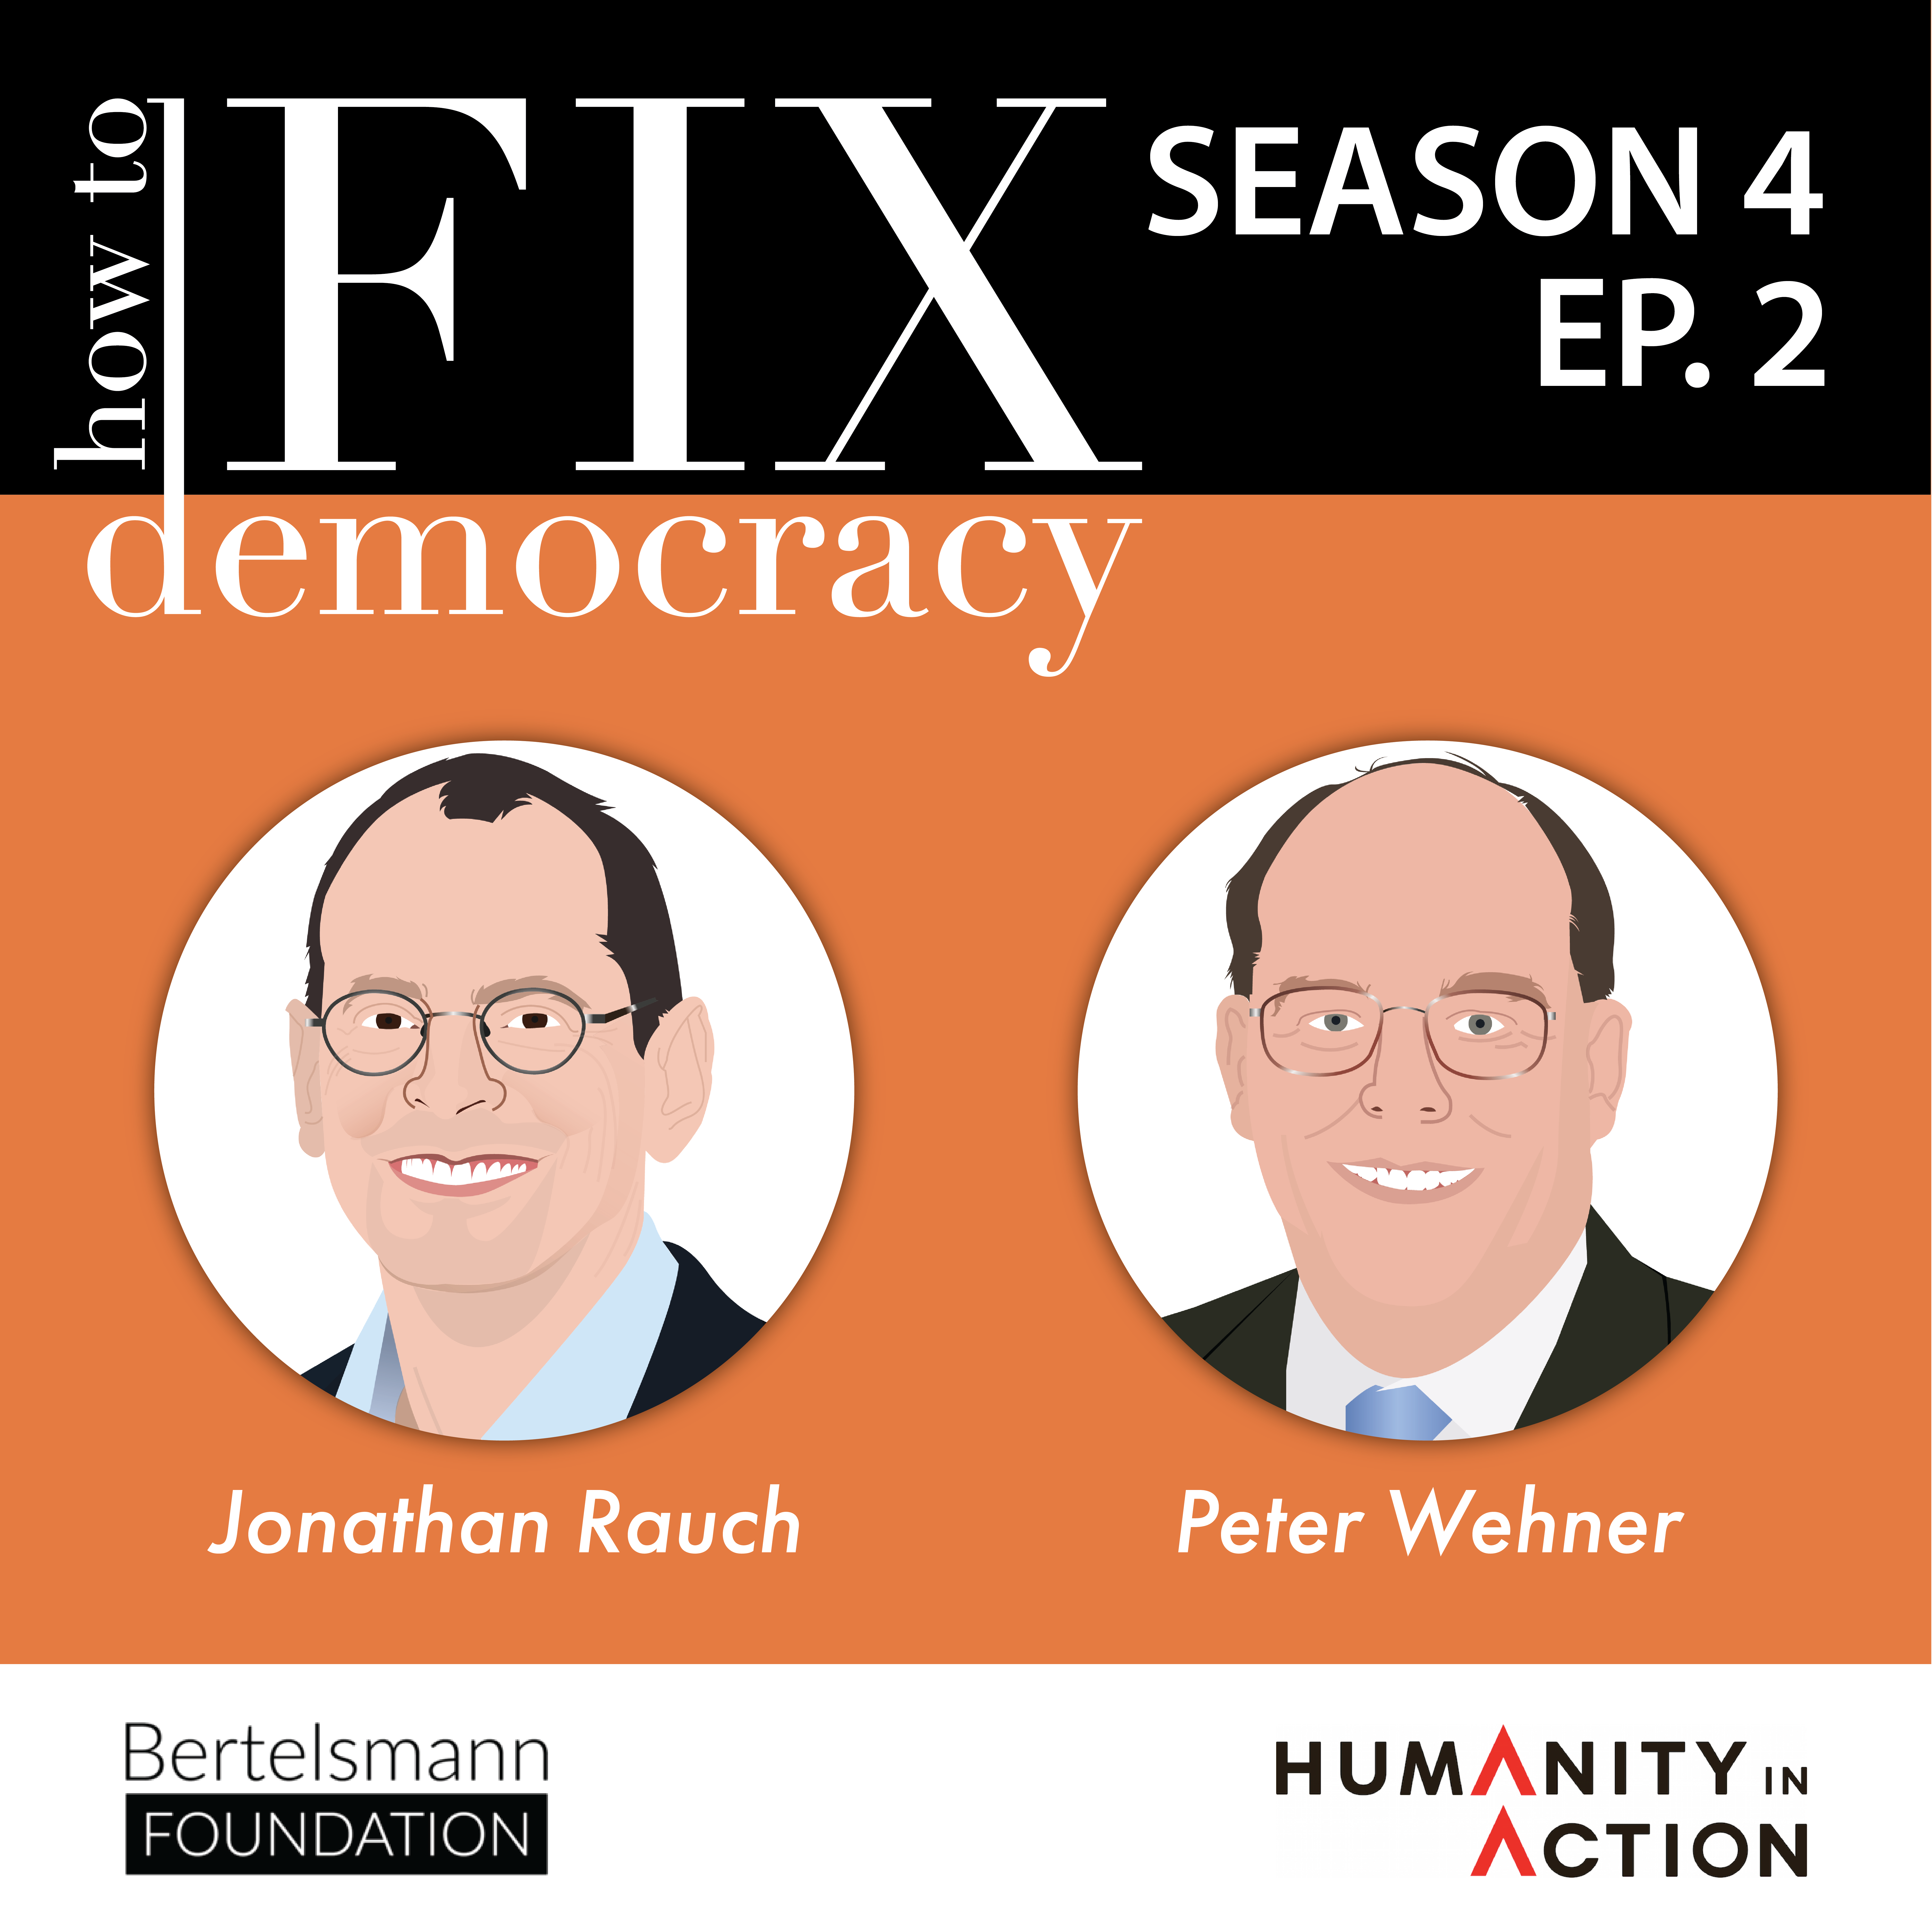 Season 4, Episode 2 | Peter Wehner and Jonathan Rauch | 